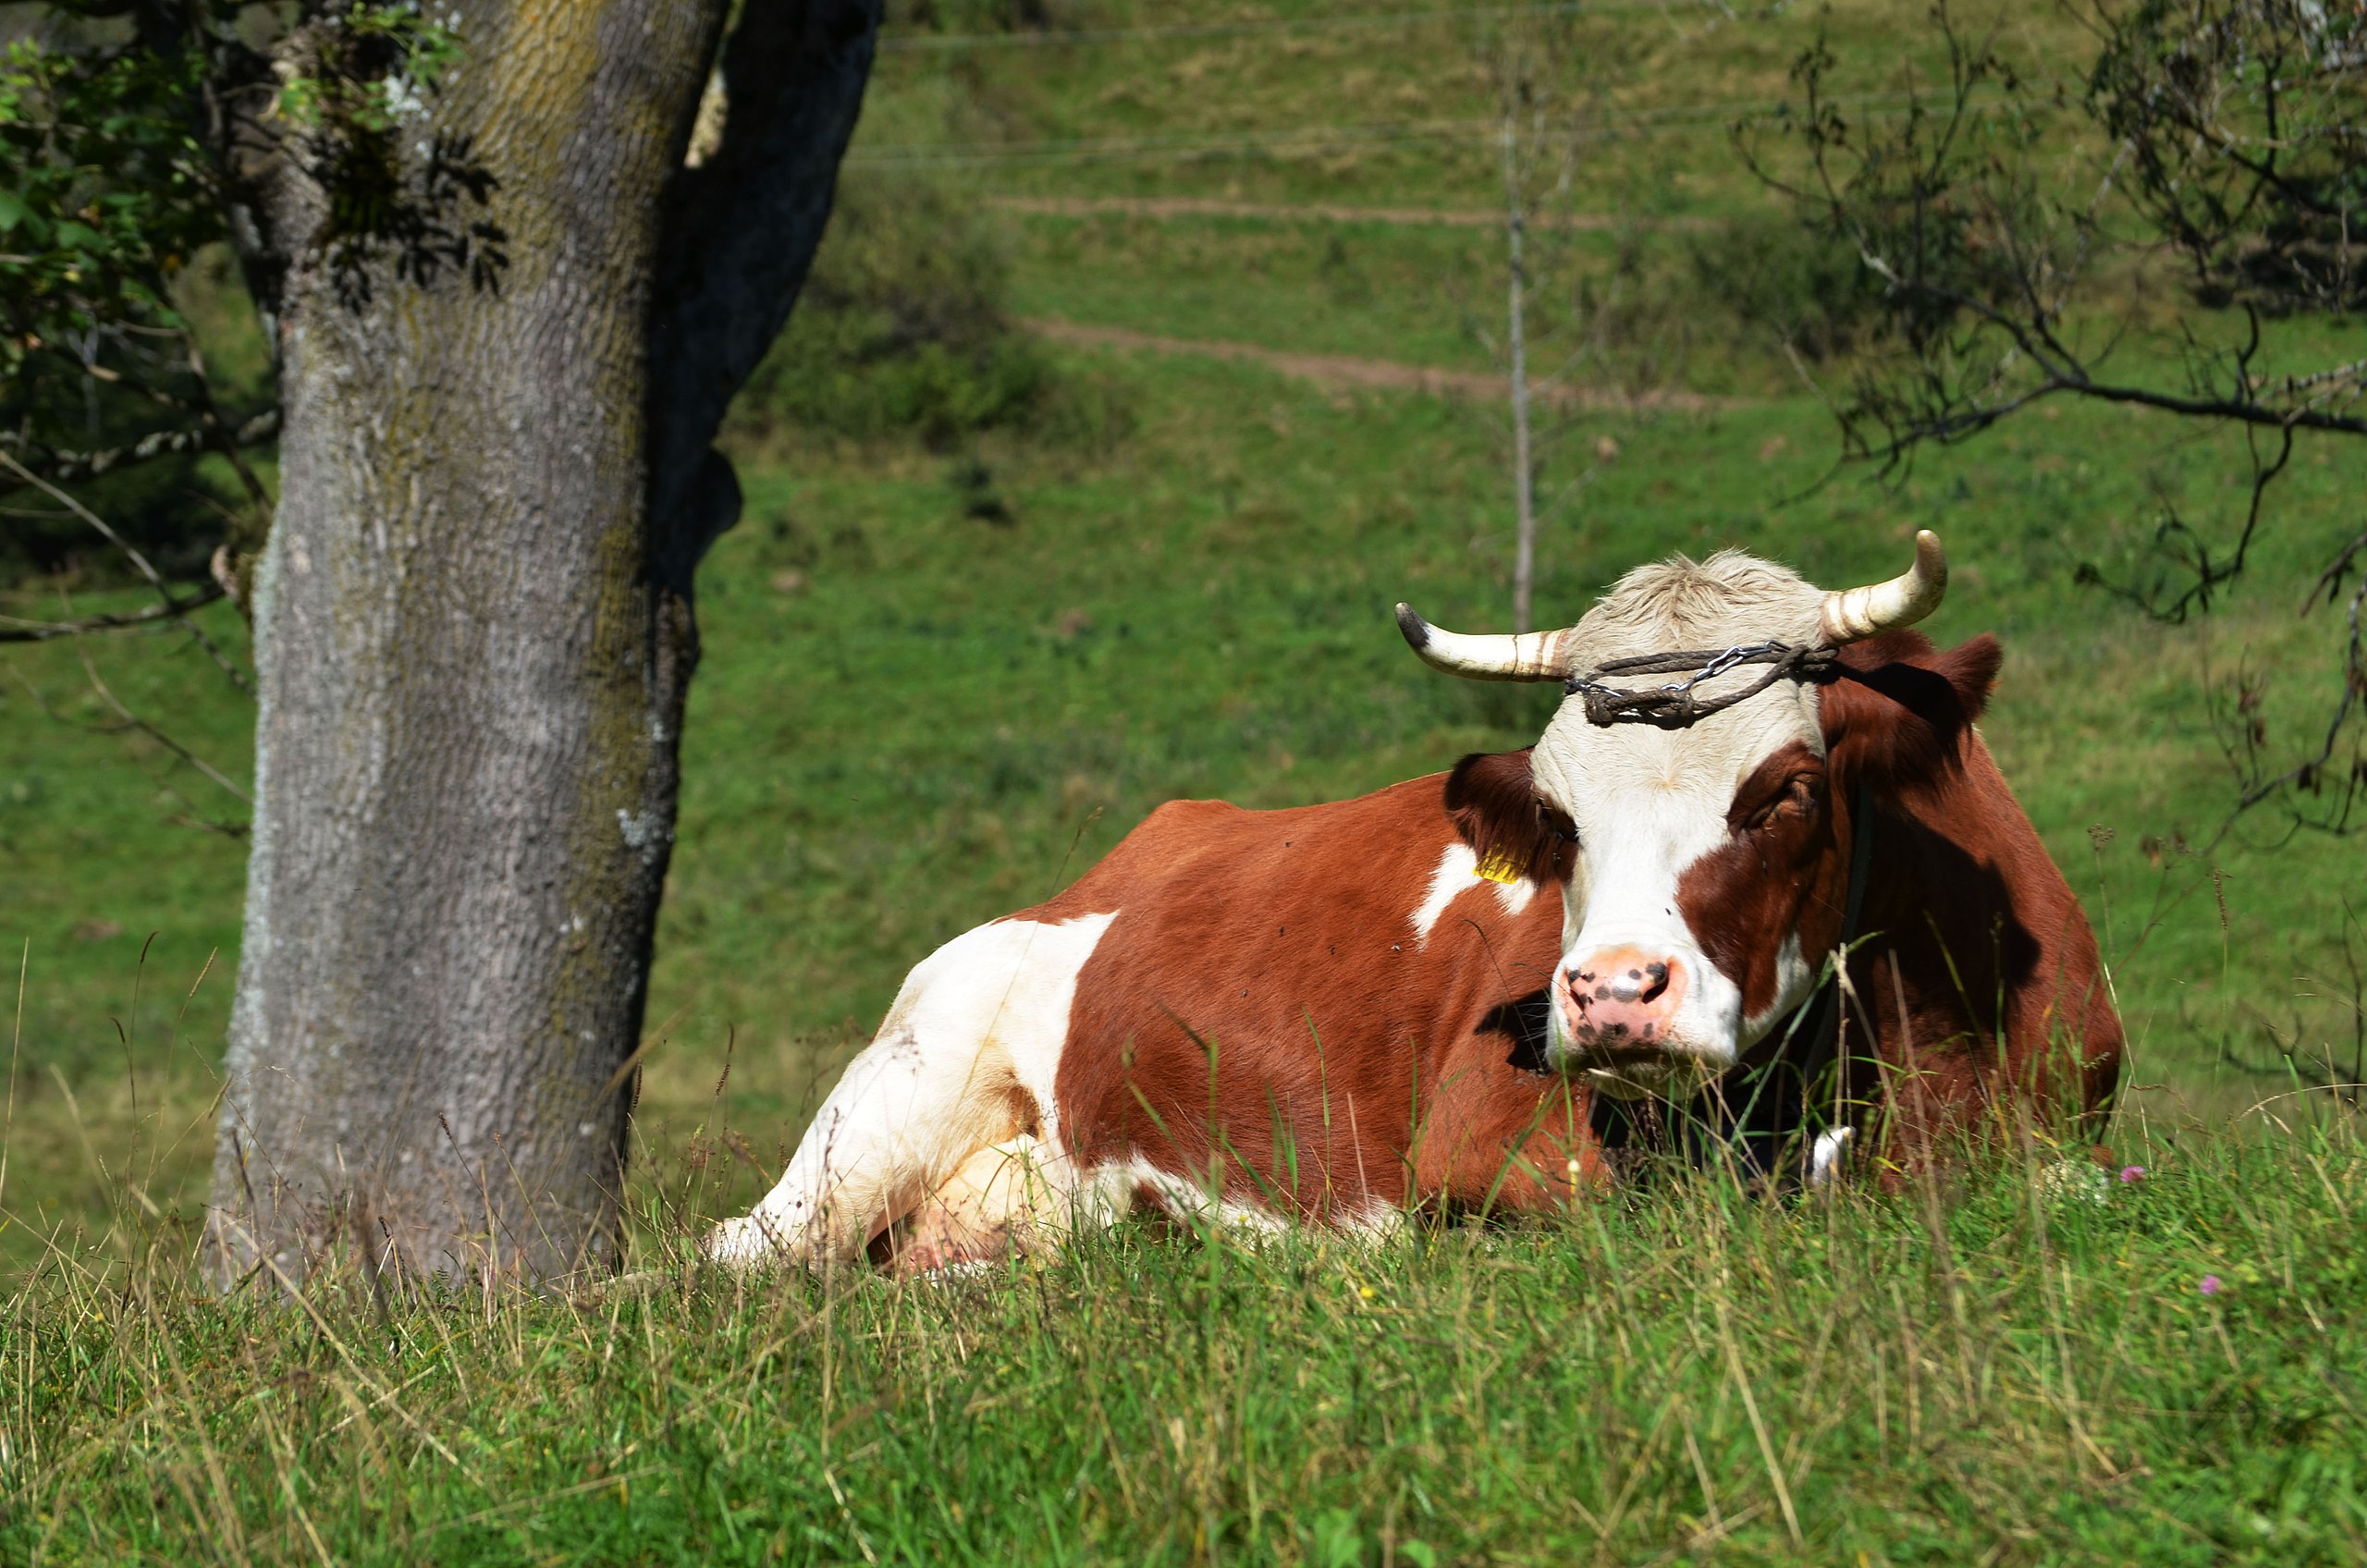 File:Cow eating straw new forest.jpg - Wikipedia